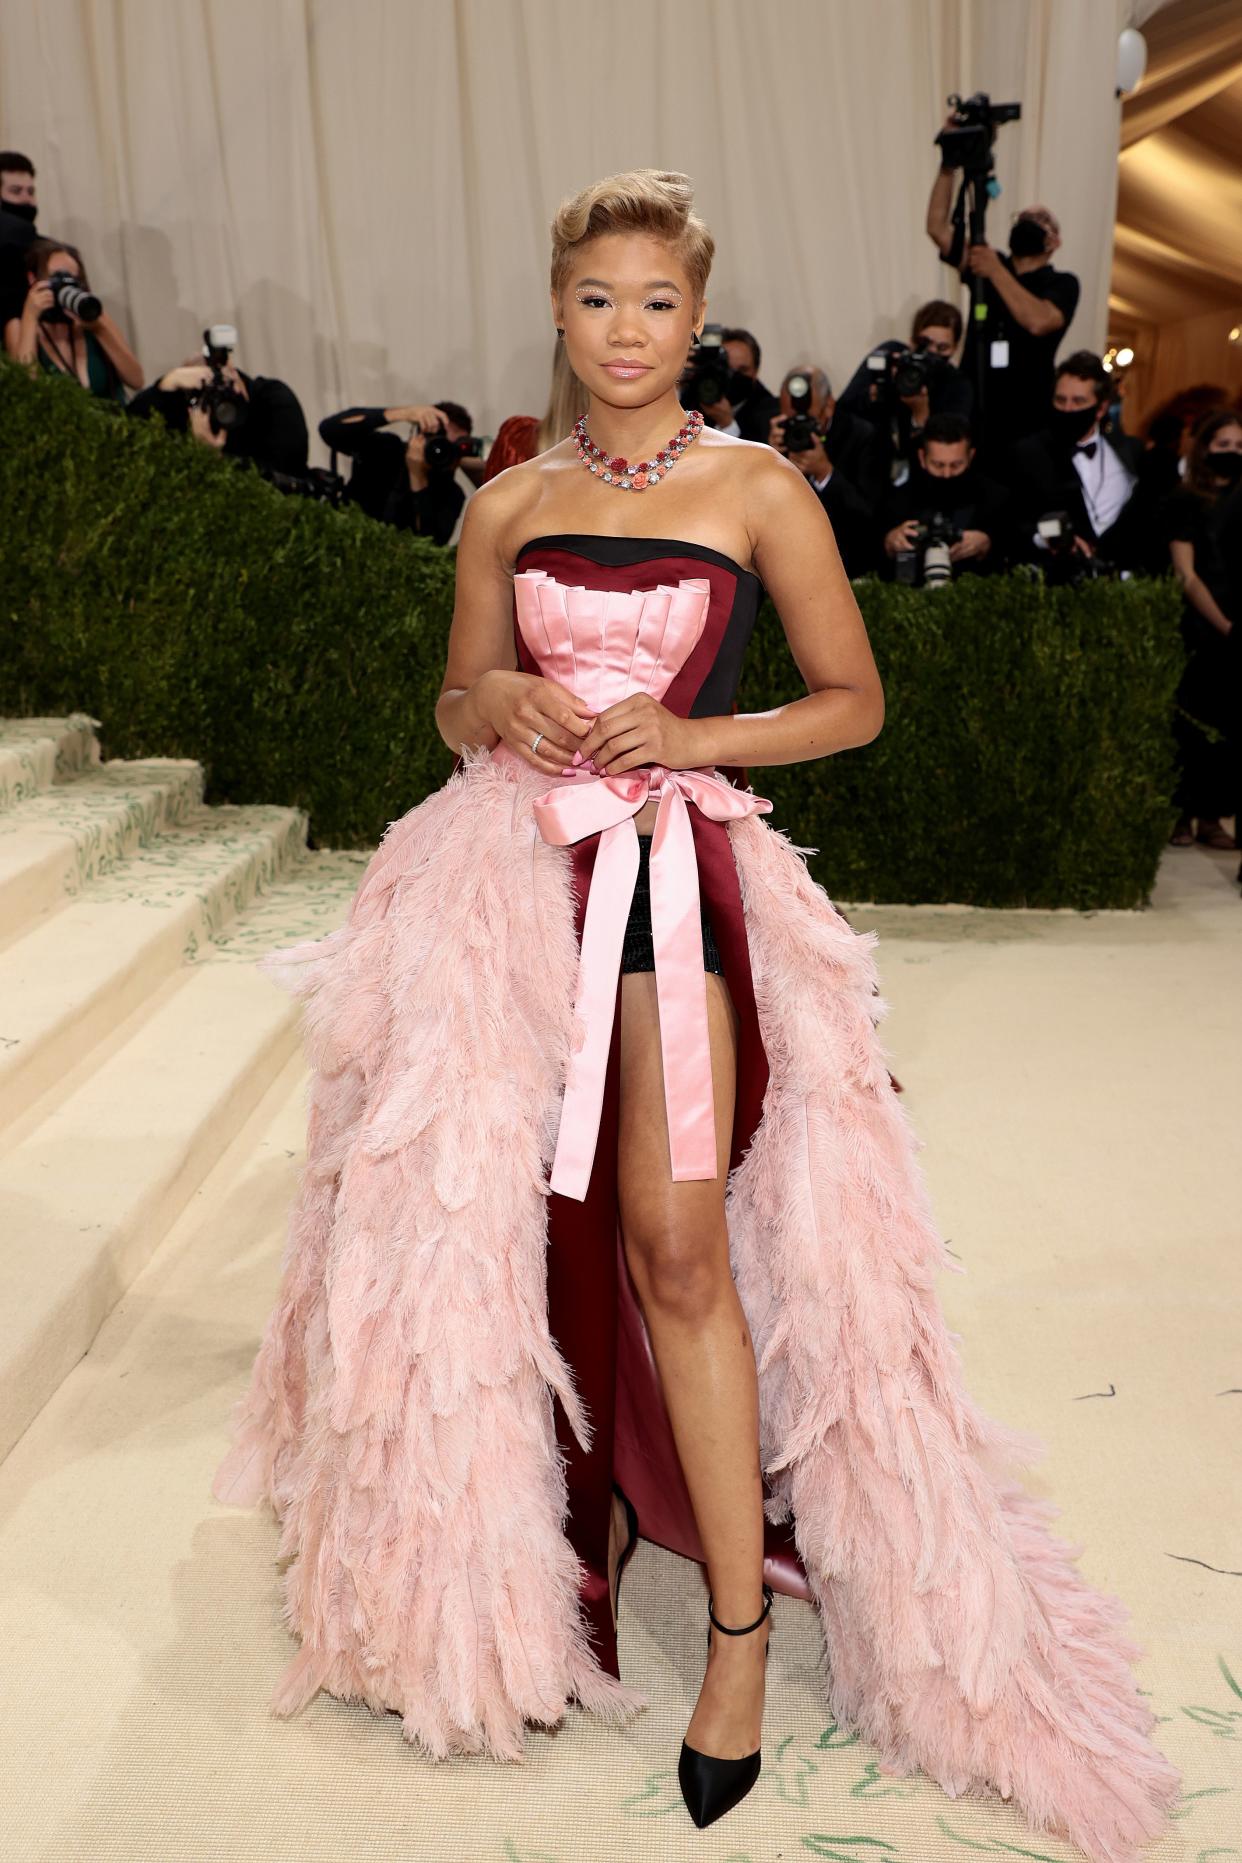 Storm Reid attends The 2021 Met Gala Celebrating In America: A Lexicon Of Fashion at Metropolitan Museum of Art on Sept. 13, 2021 in New York.